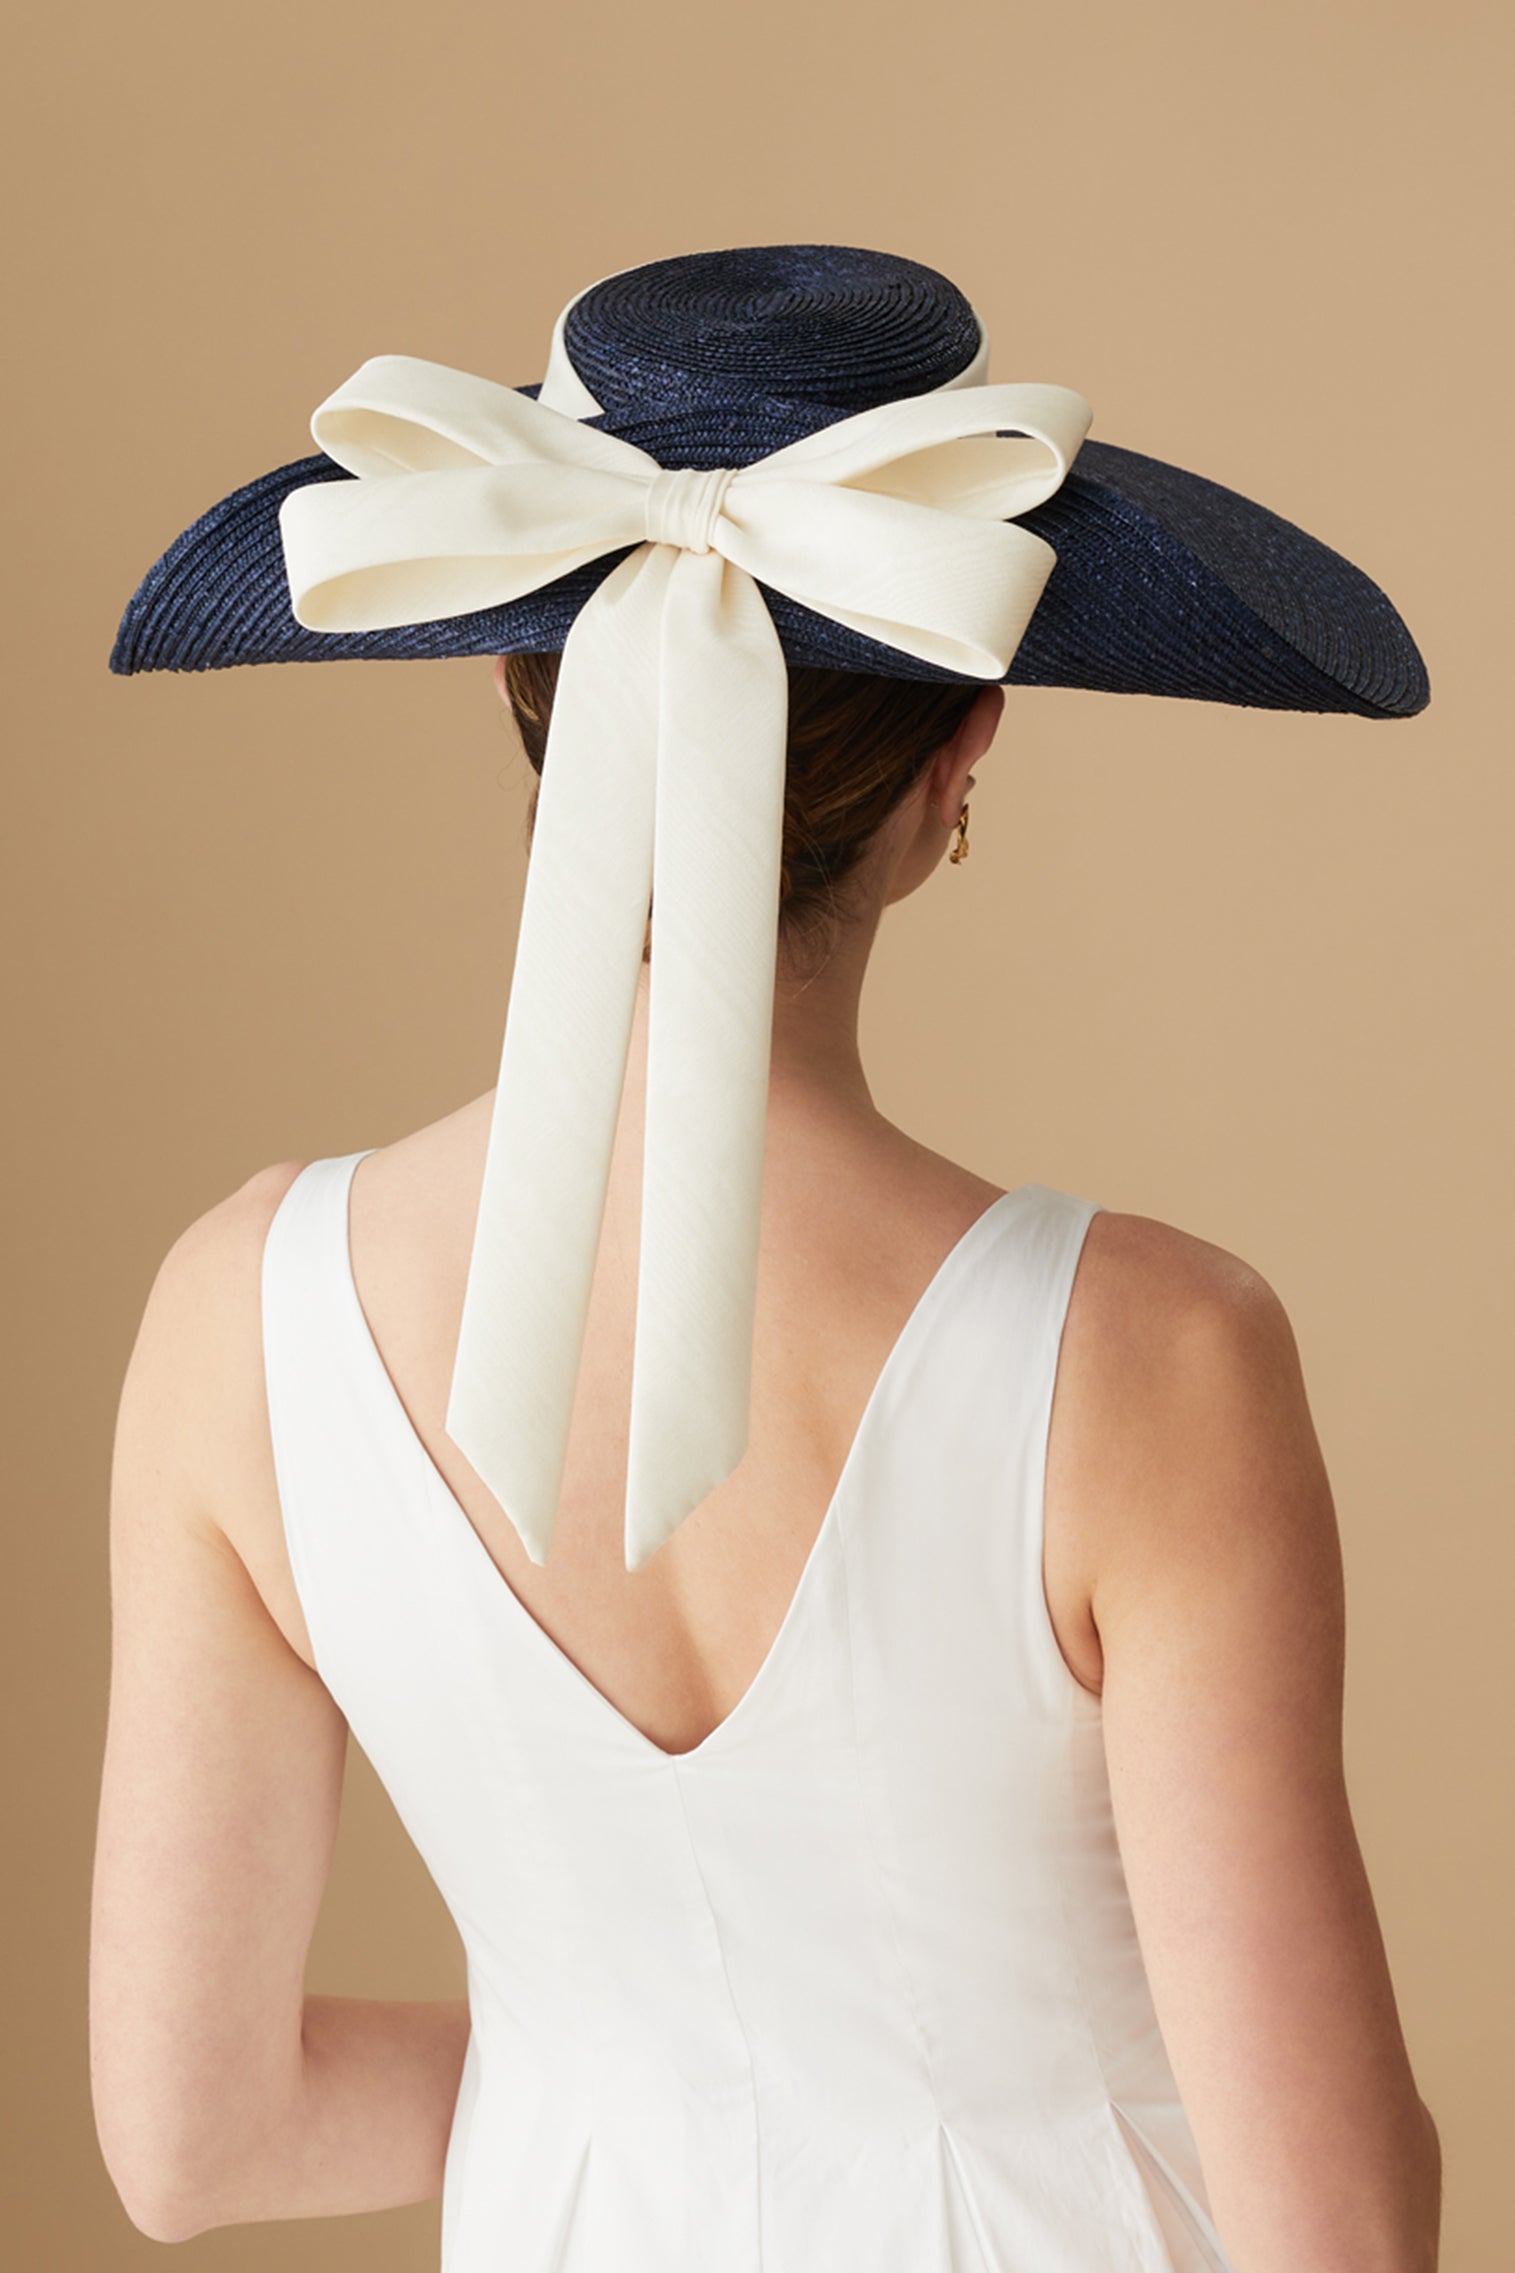 Lady Grey Navy Wide Brim Hat - Lock Couture by Awon Golding - Lock & Co. Hatters London UK